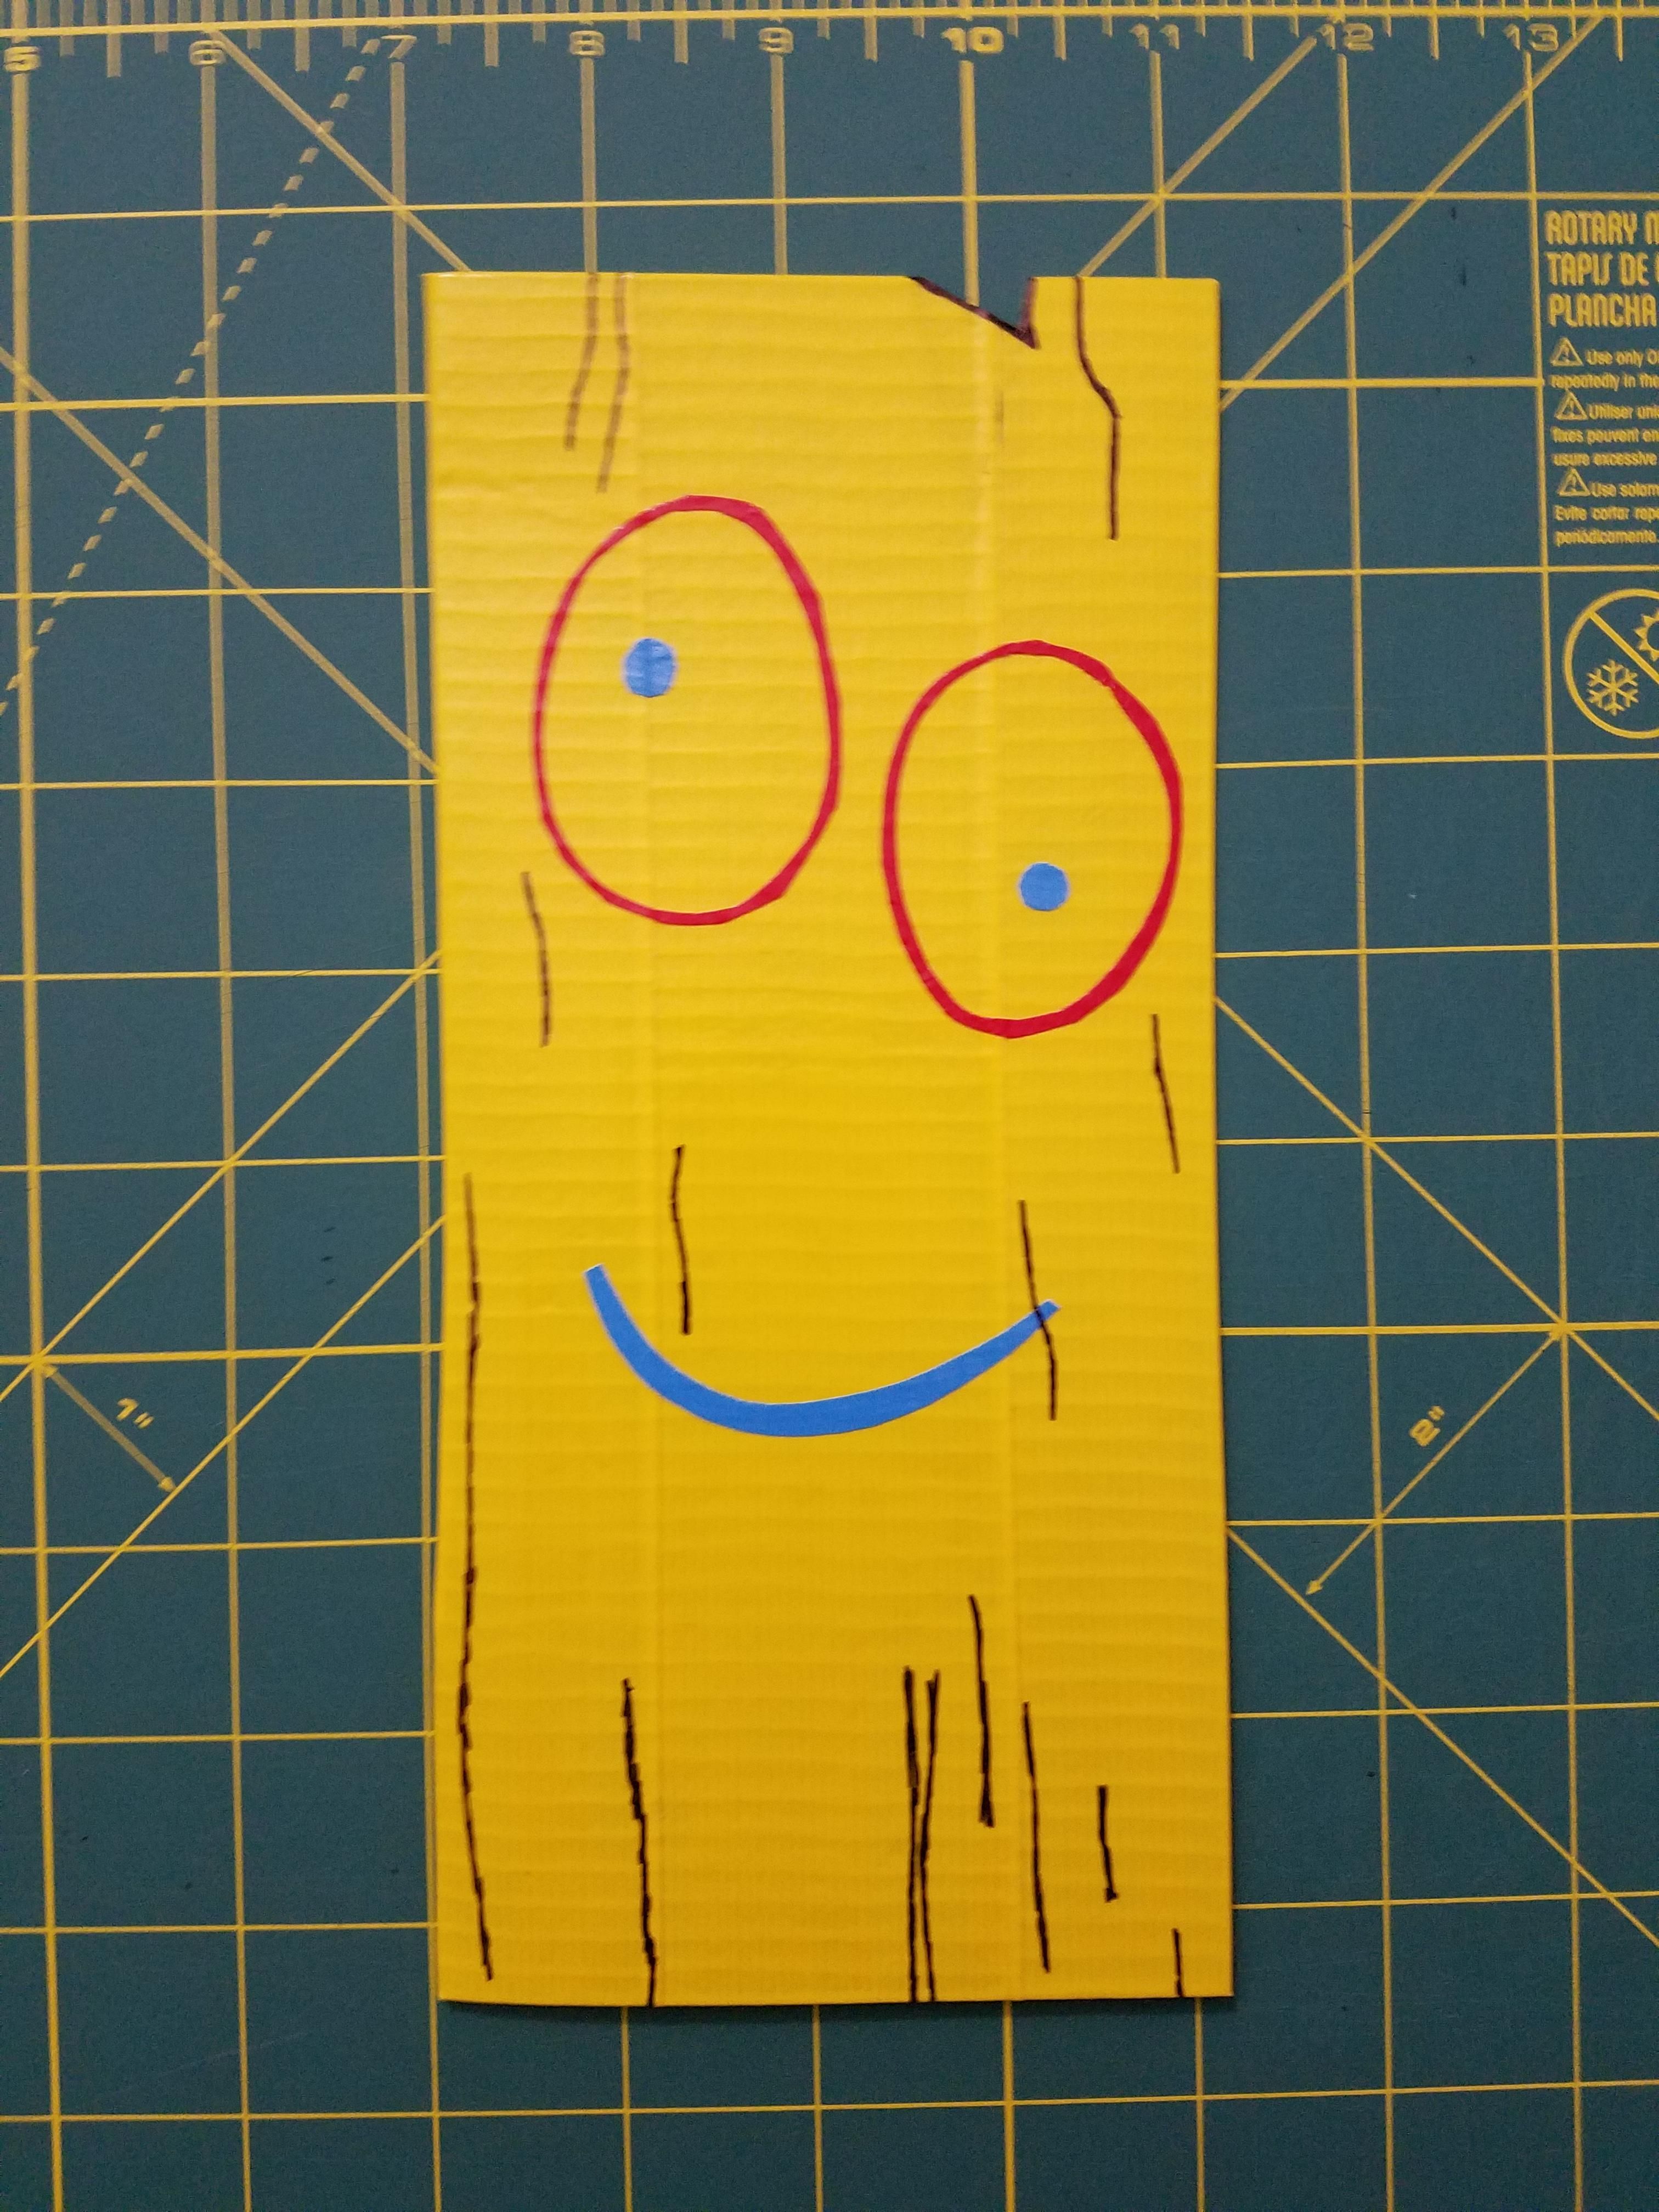 Throwback. Plank from Ed Edd and Eddy made with duct tape. Ed edd